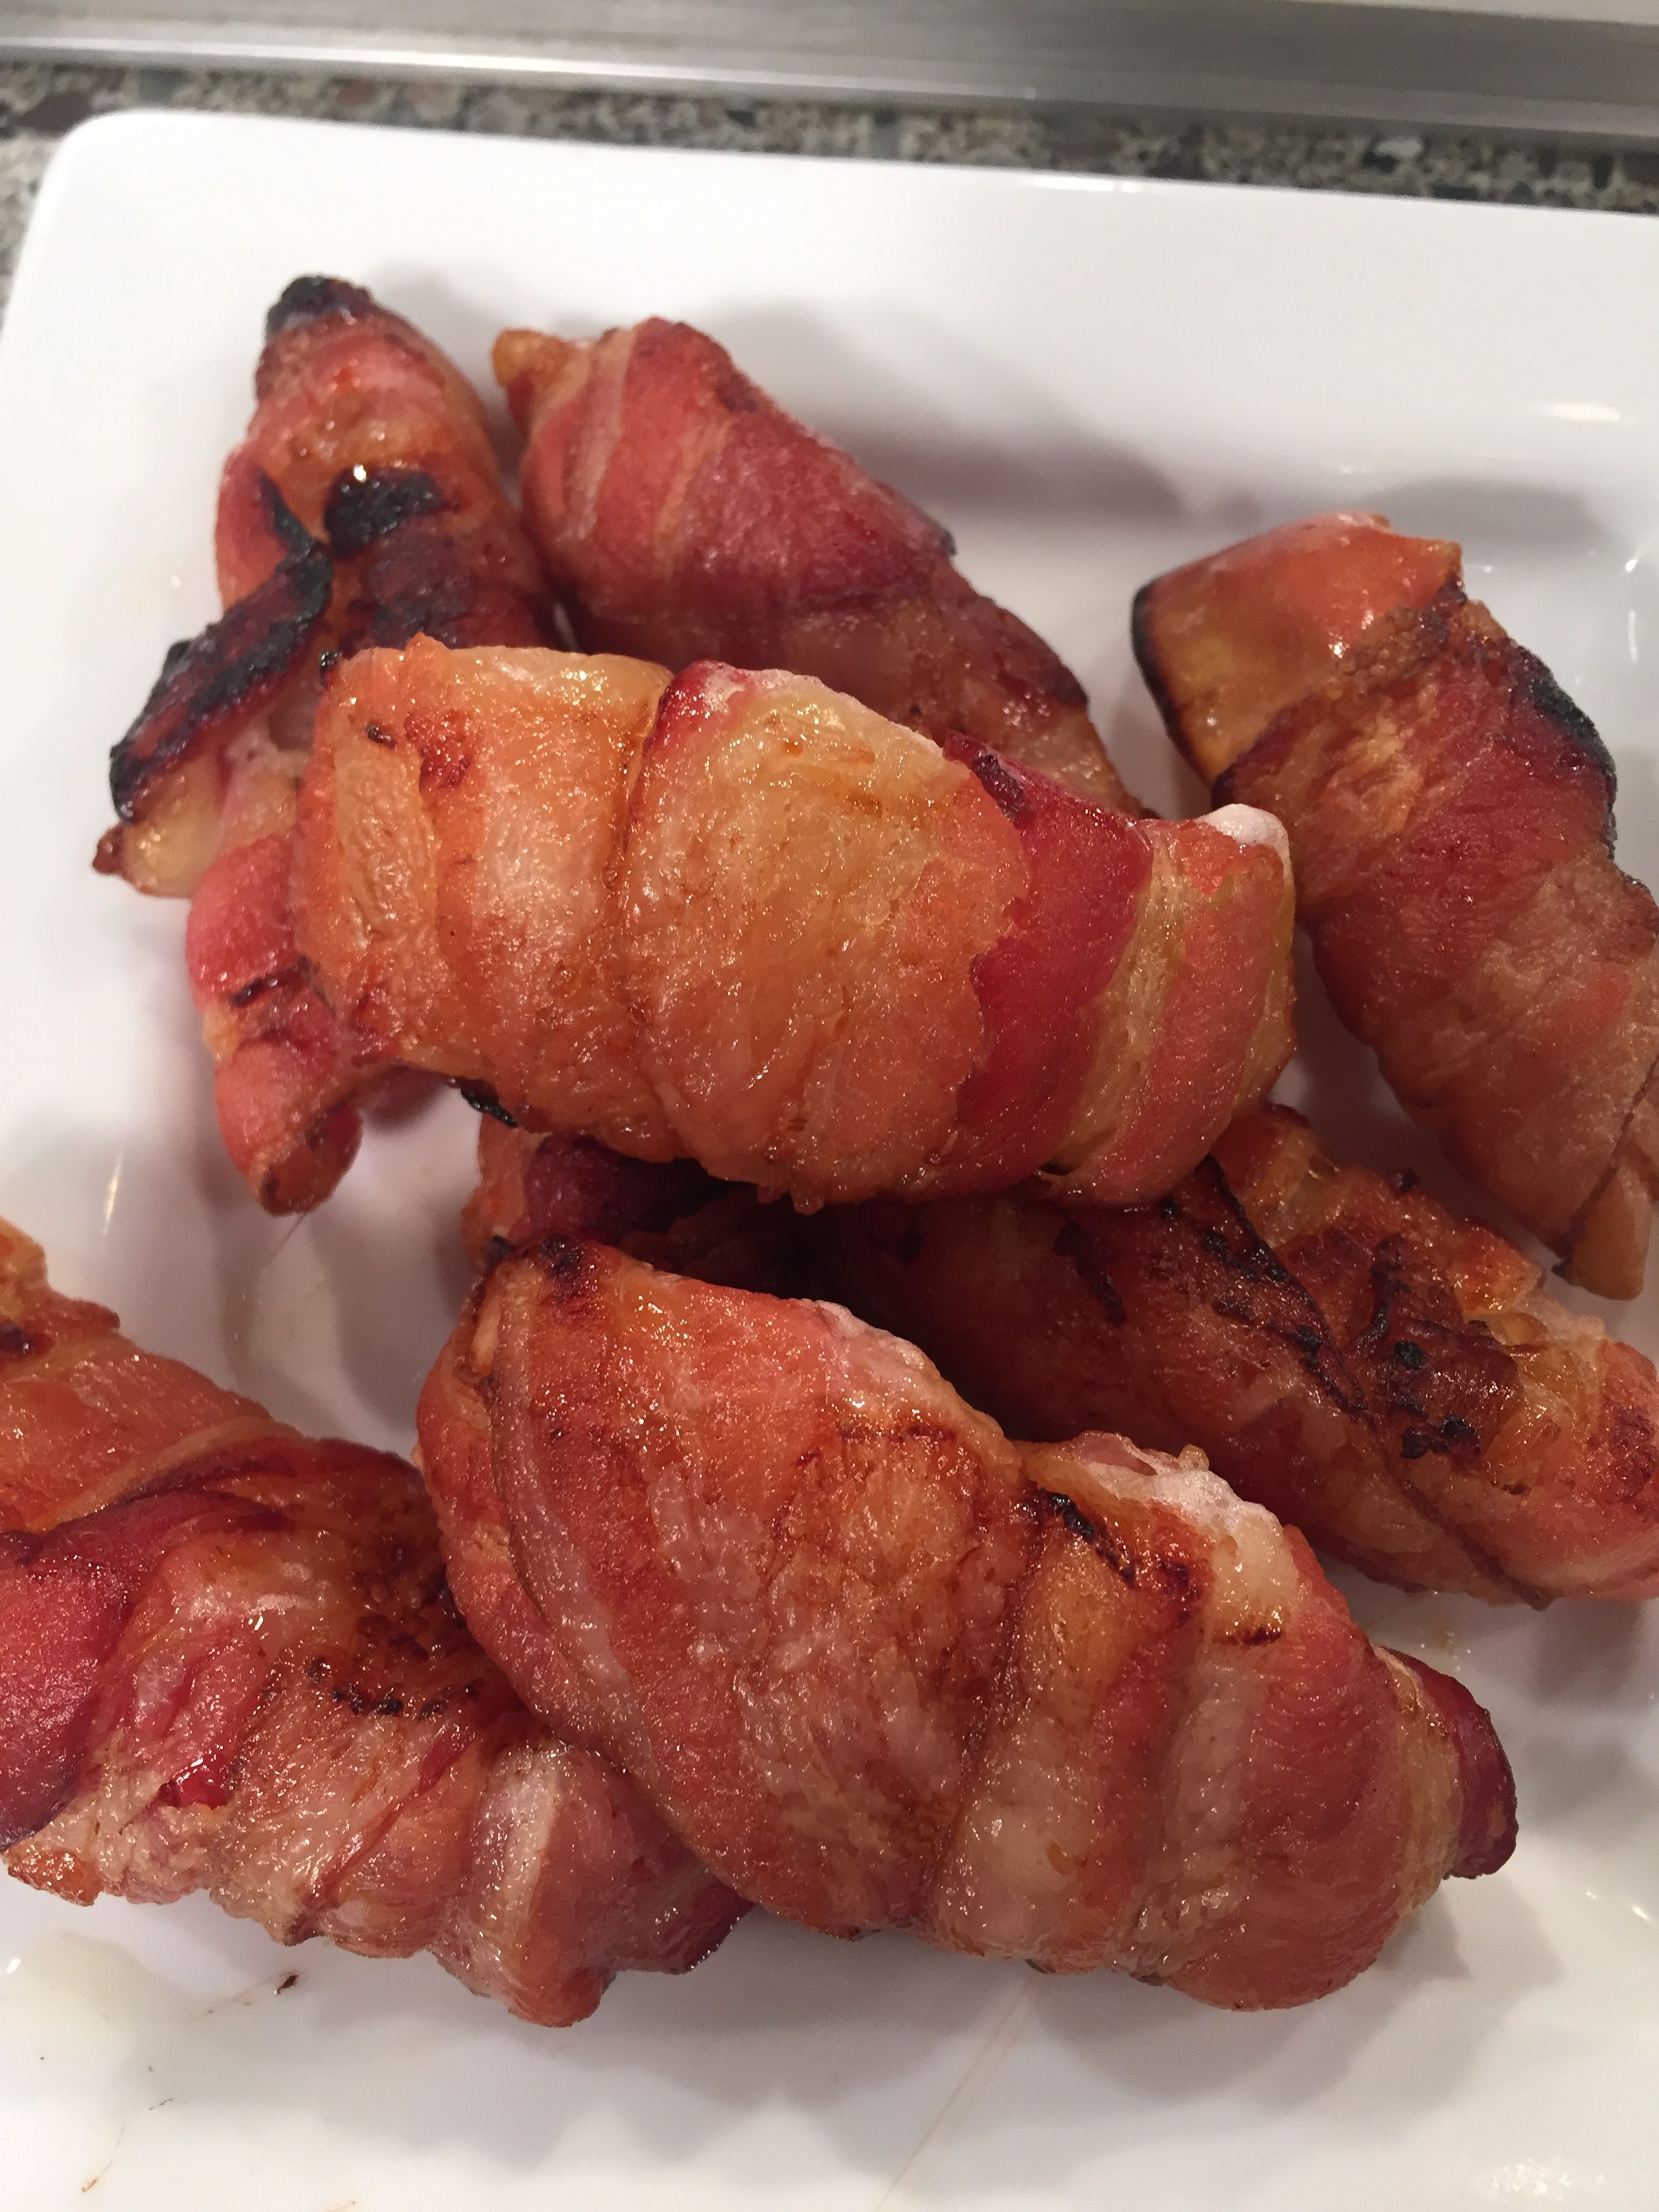 Bacon-wrapped apples from The Produce Mom